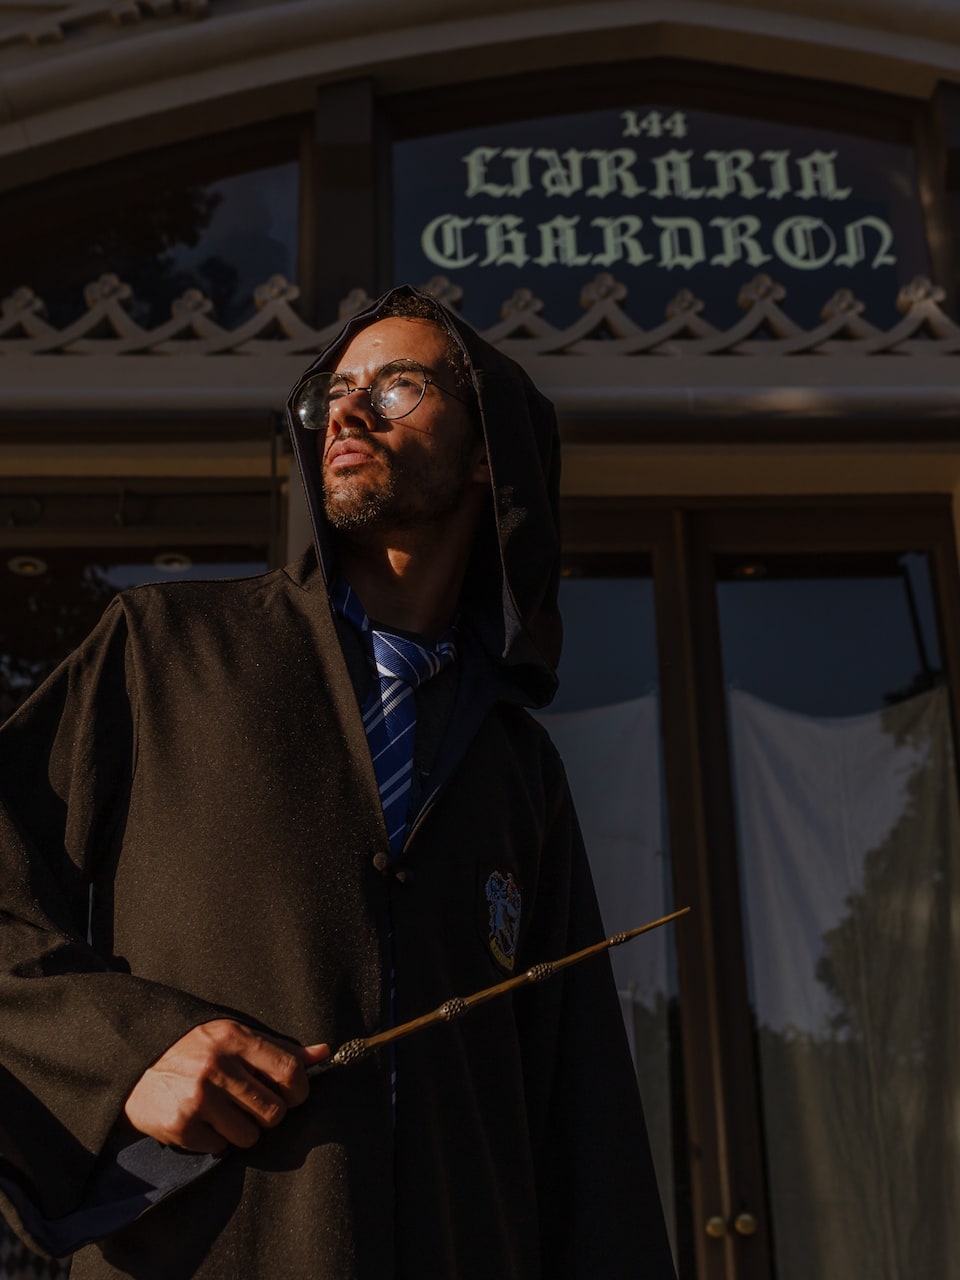 Harry Potter and Porto Ravenclaw cloak and tie with wand